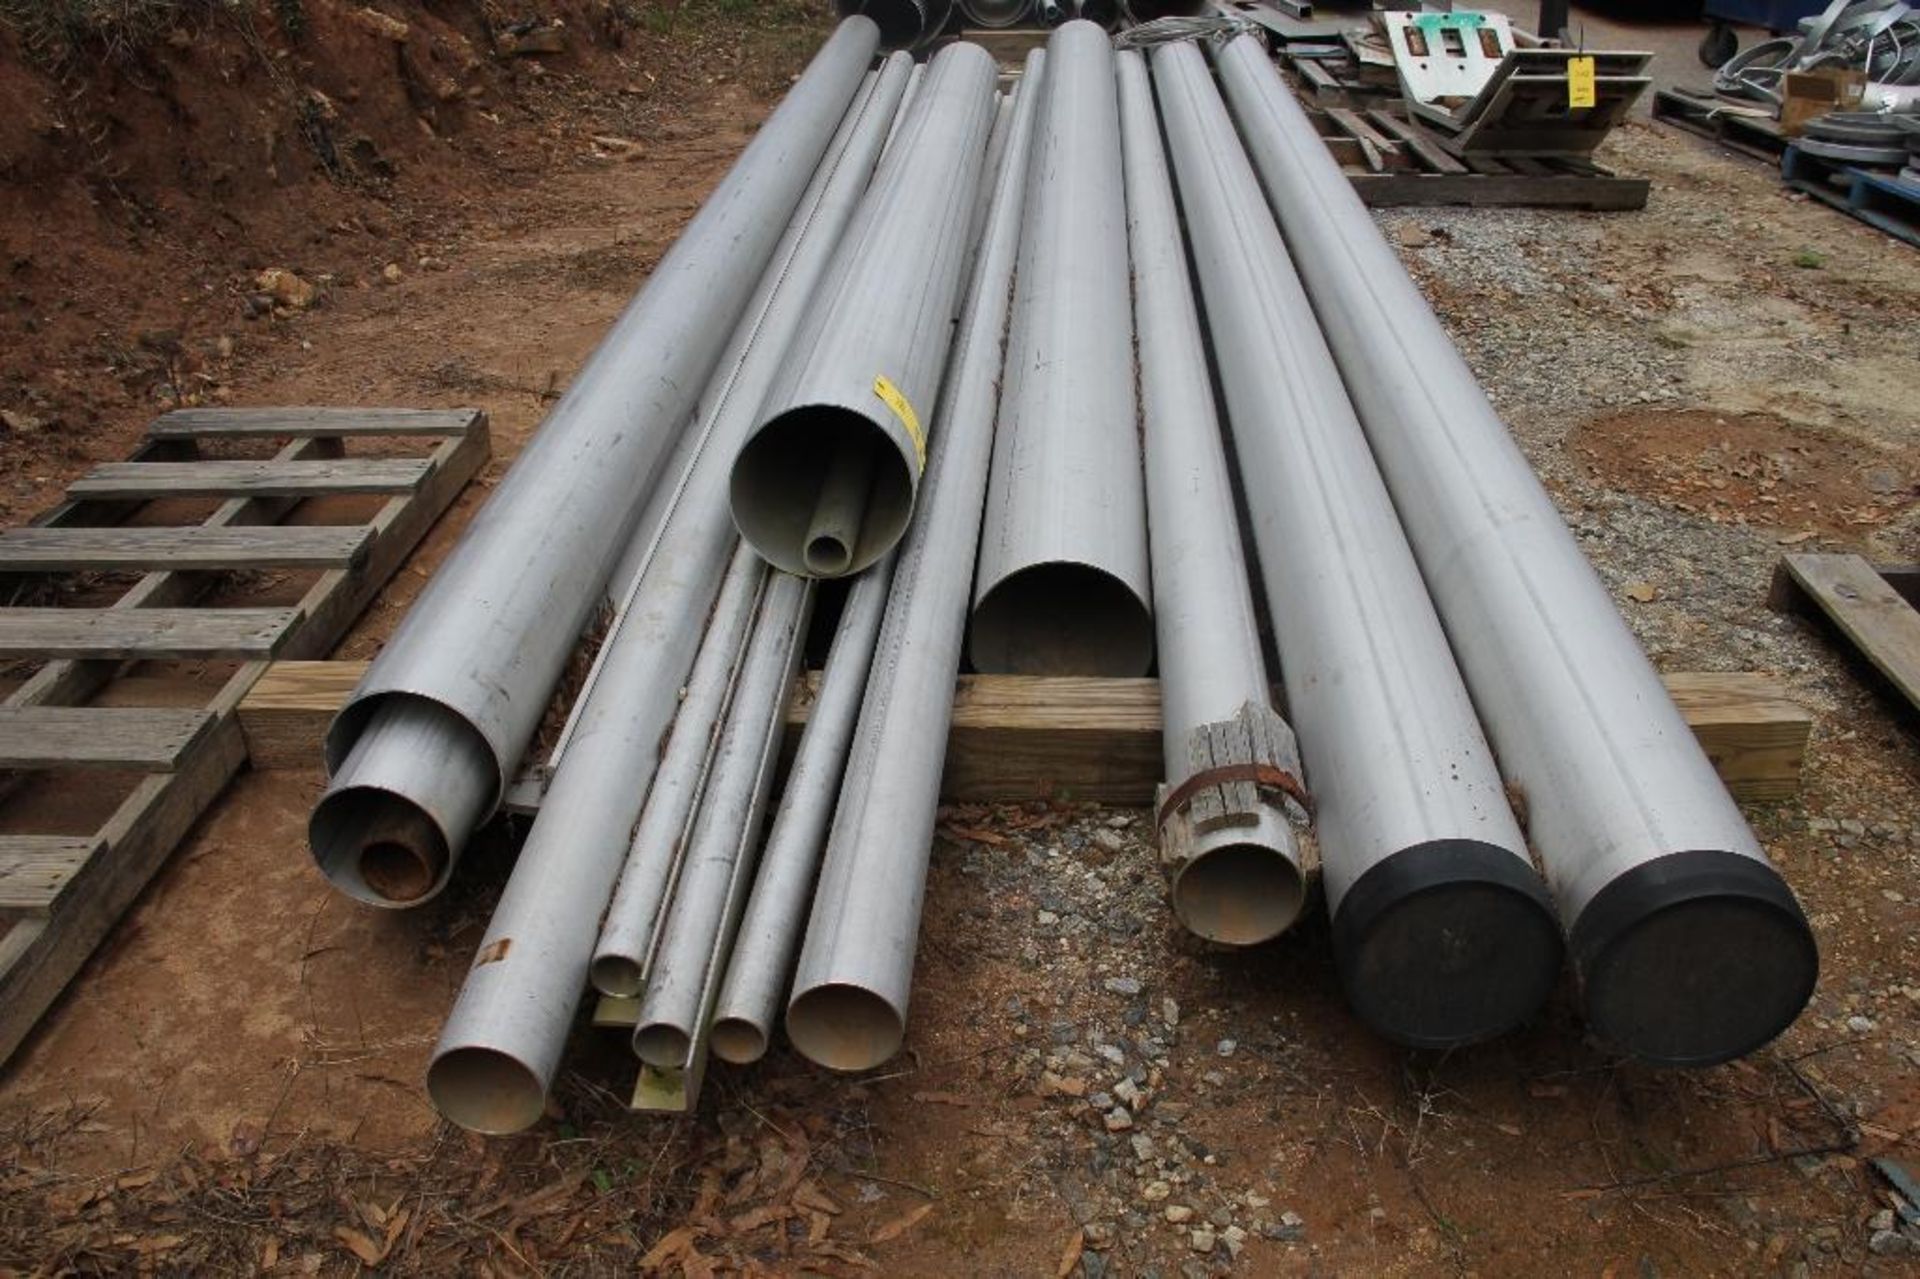 LOT: Stainless Steel Pipe including: (3) 10 in. x 21 ft. Long - 316, (2) 10 in. x 14 ft. Long - 316,